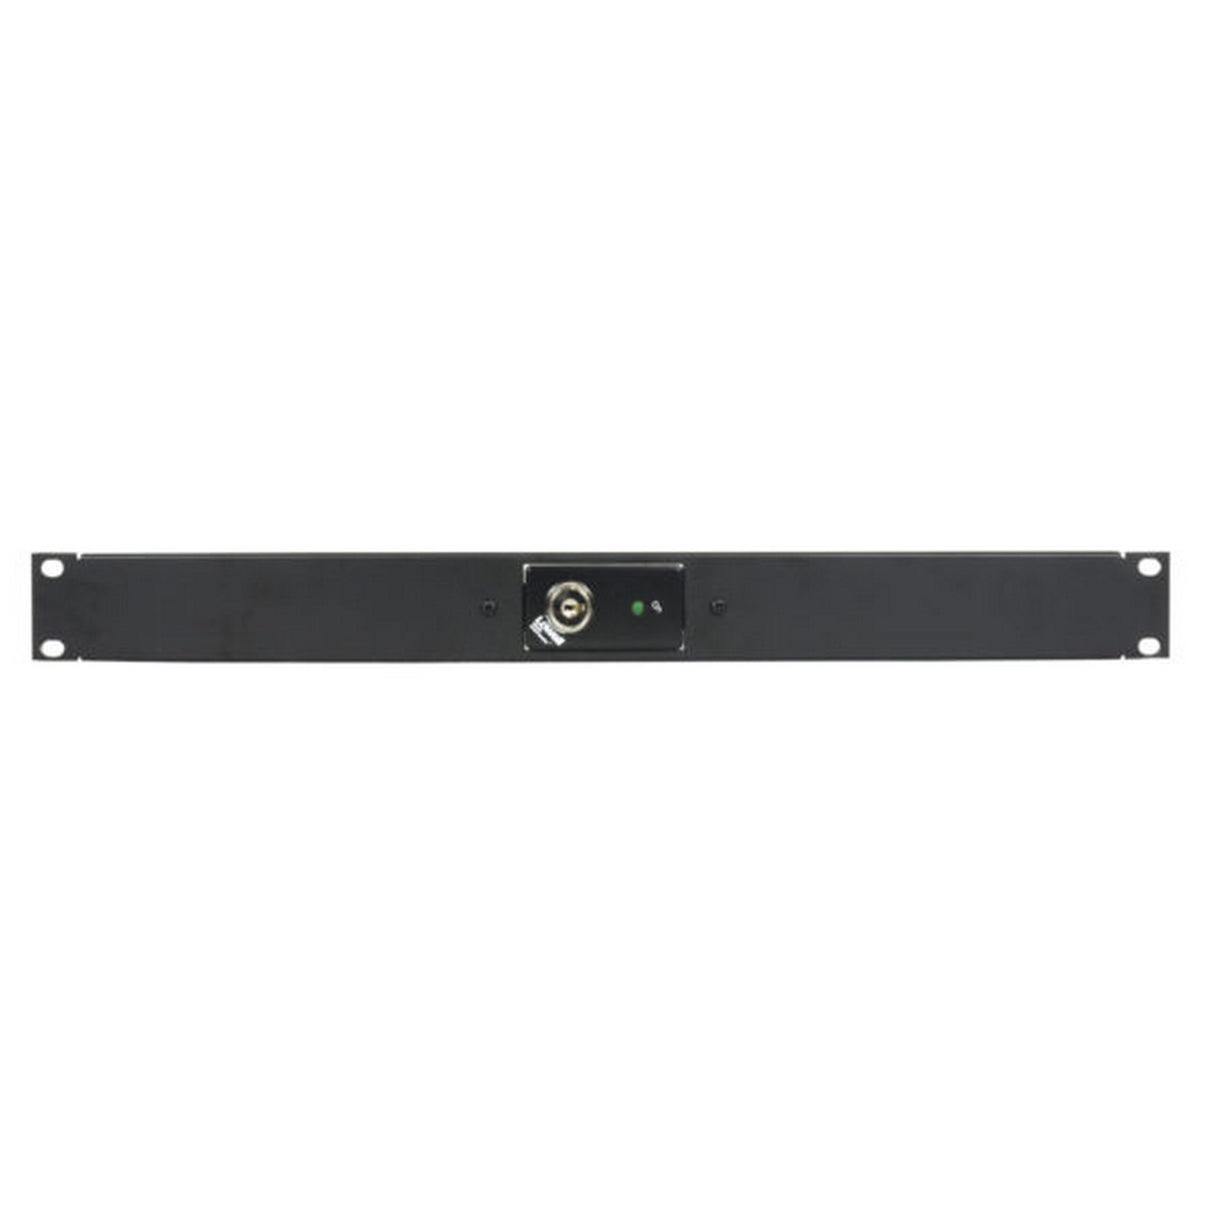 Lowell RPSB-MKR Momentary Single Pole Single Throw Low-Voltage Rackmount Switch